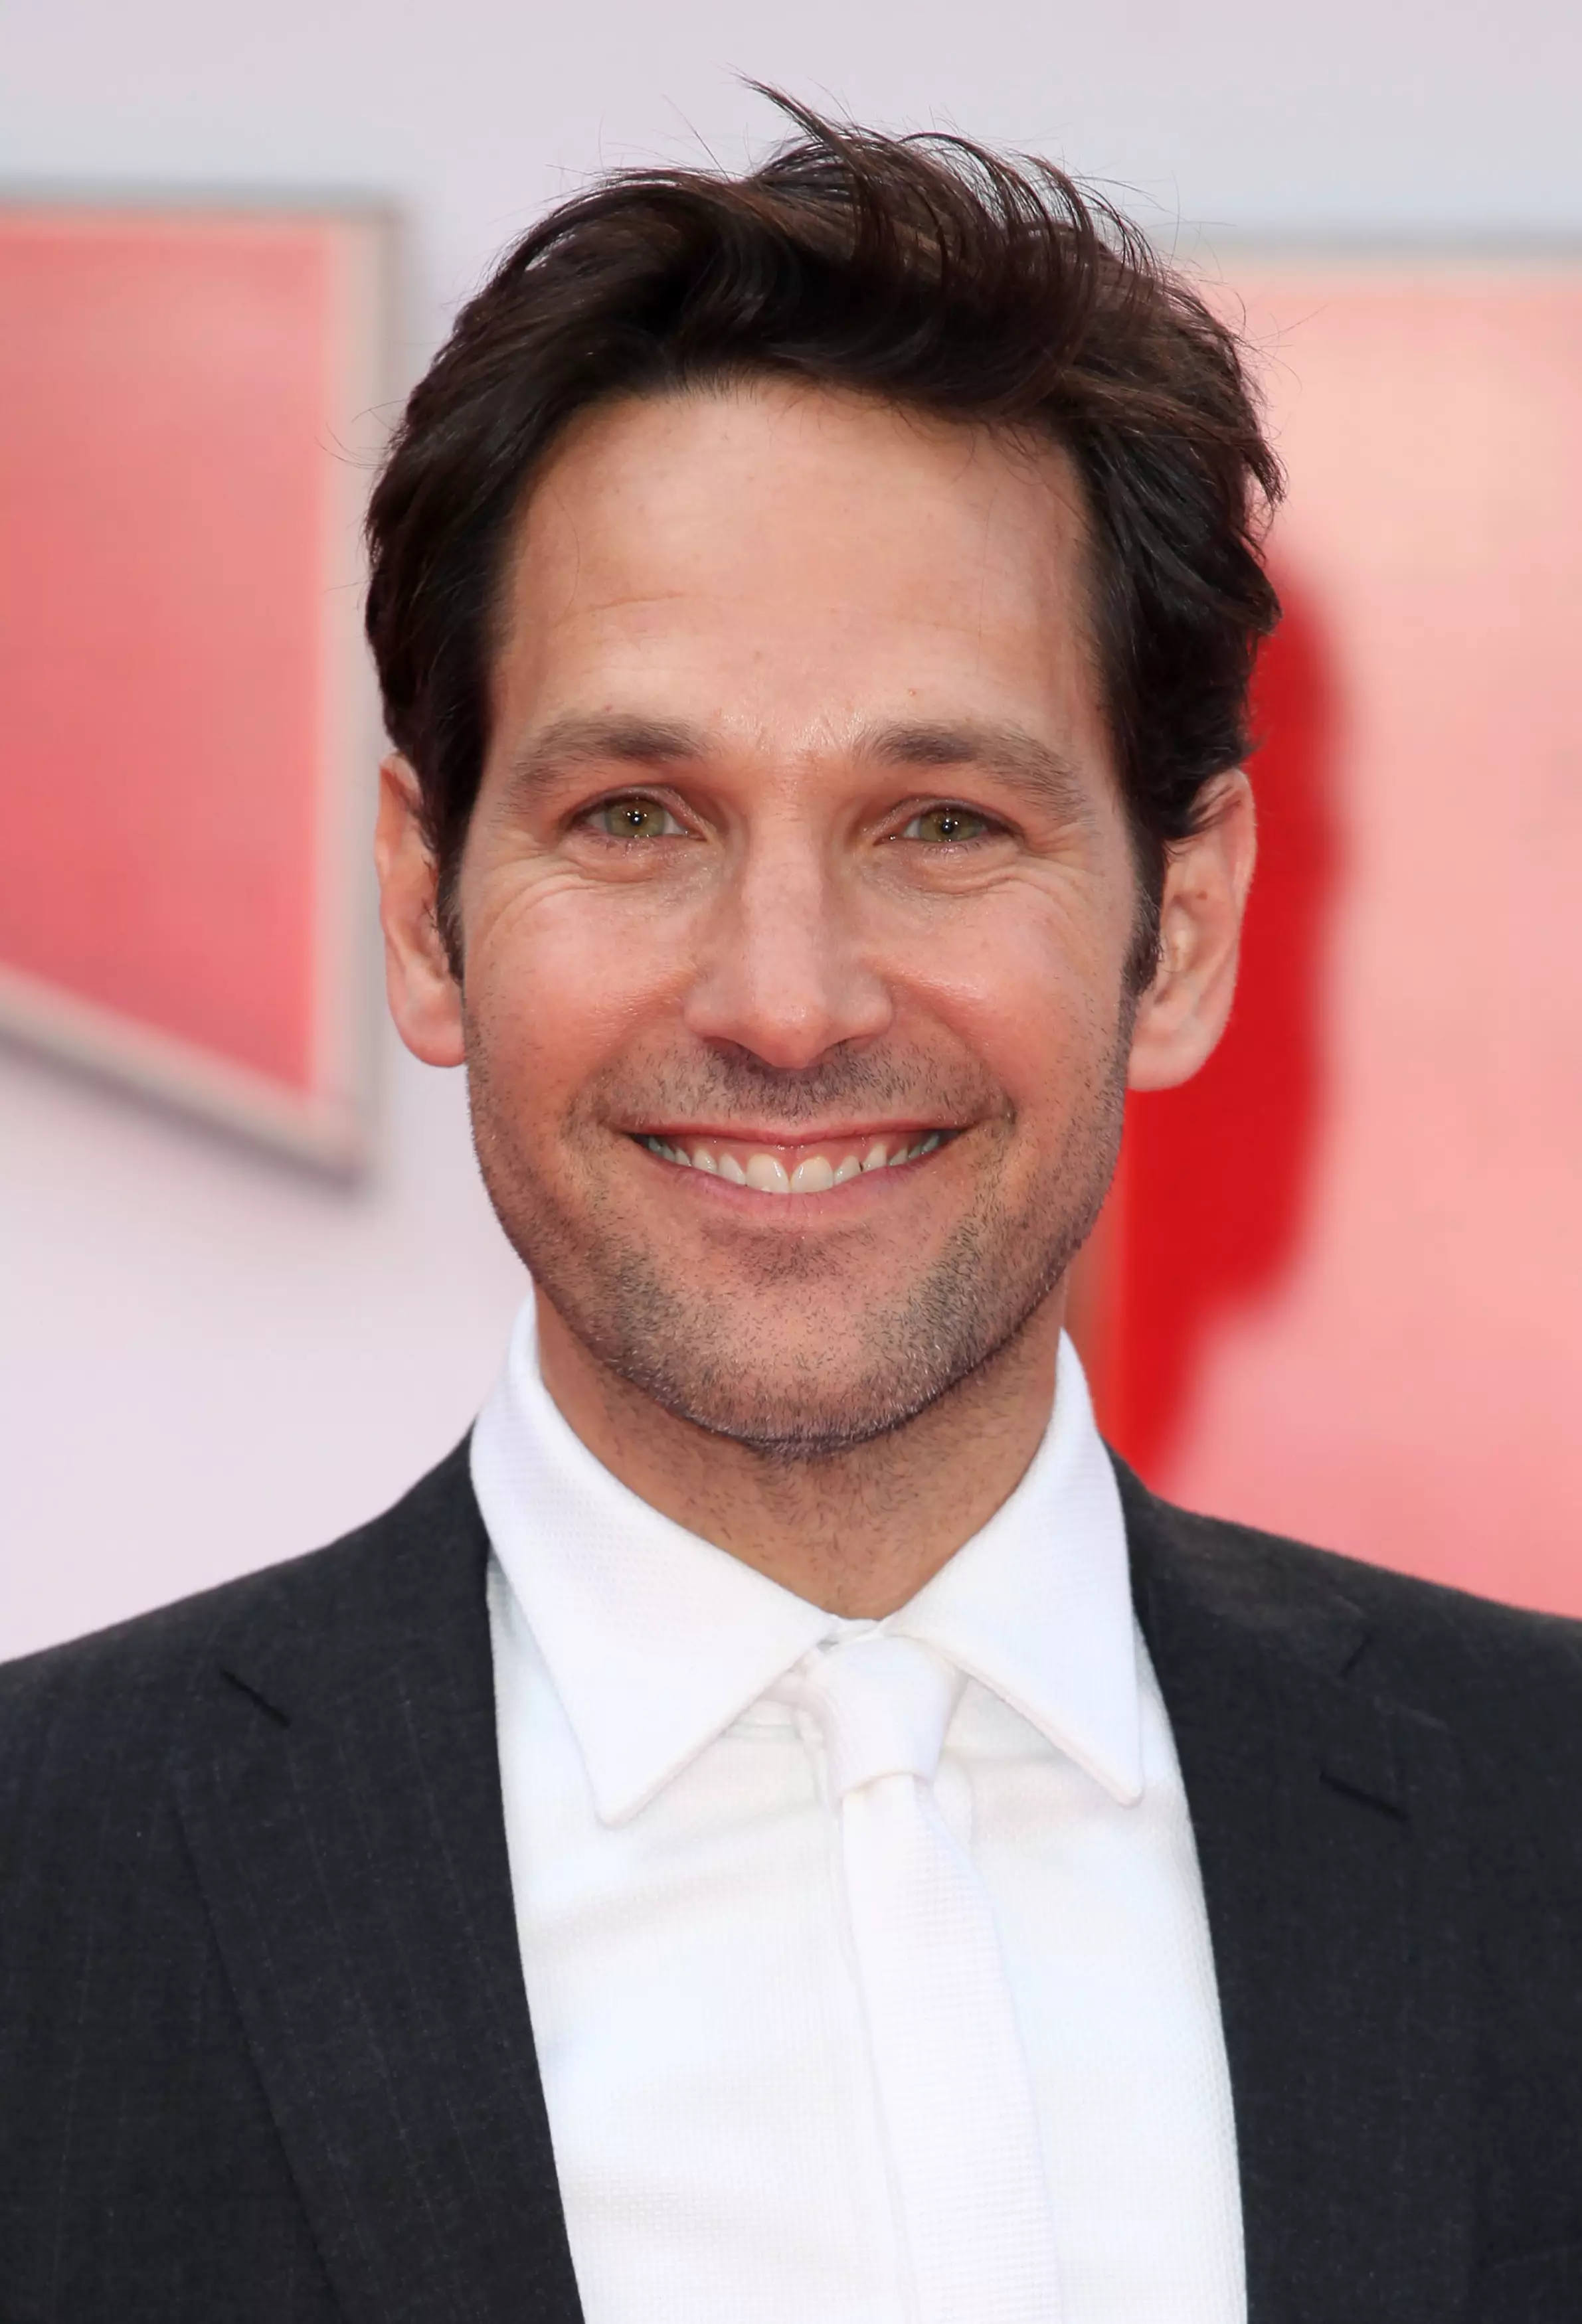 It's 25 years since Paul Rudd starred in 'Clueless' yet the Hollywood star hasn't aged a day (